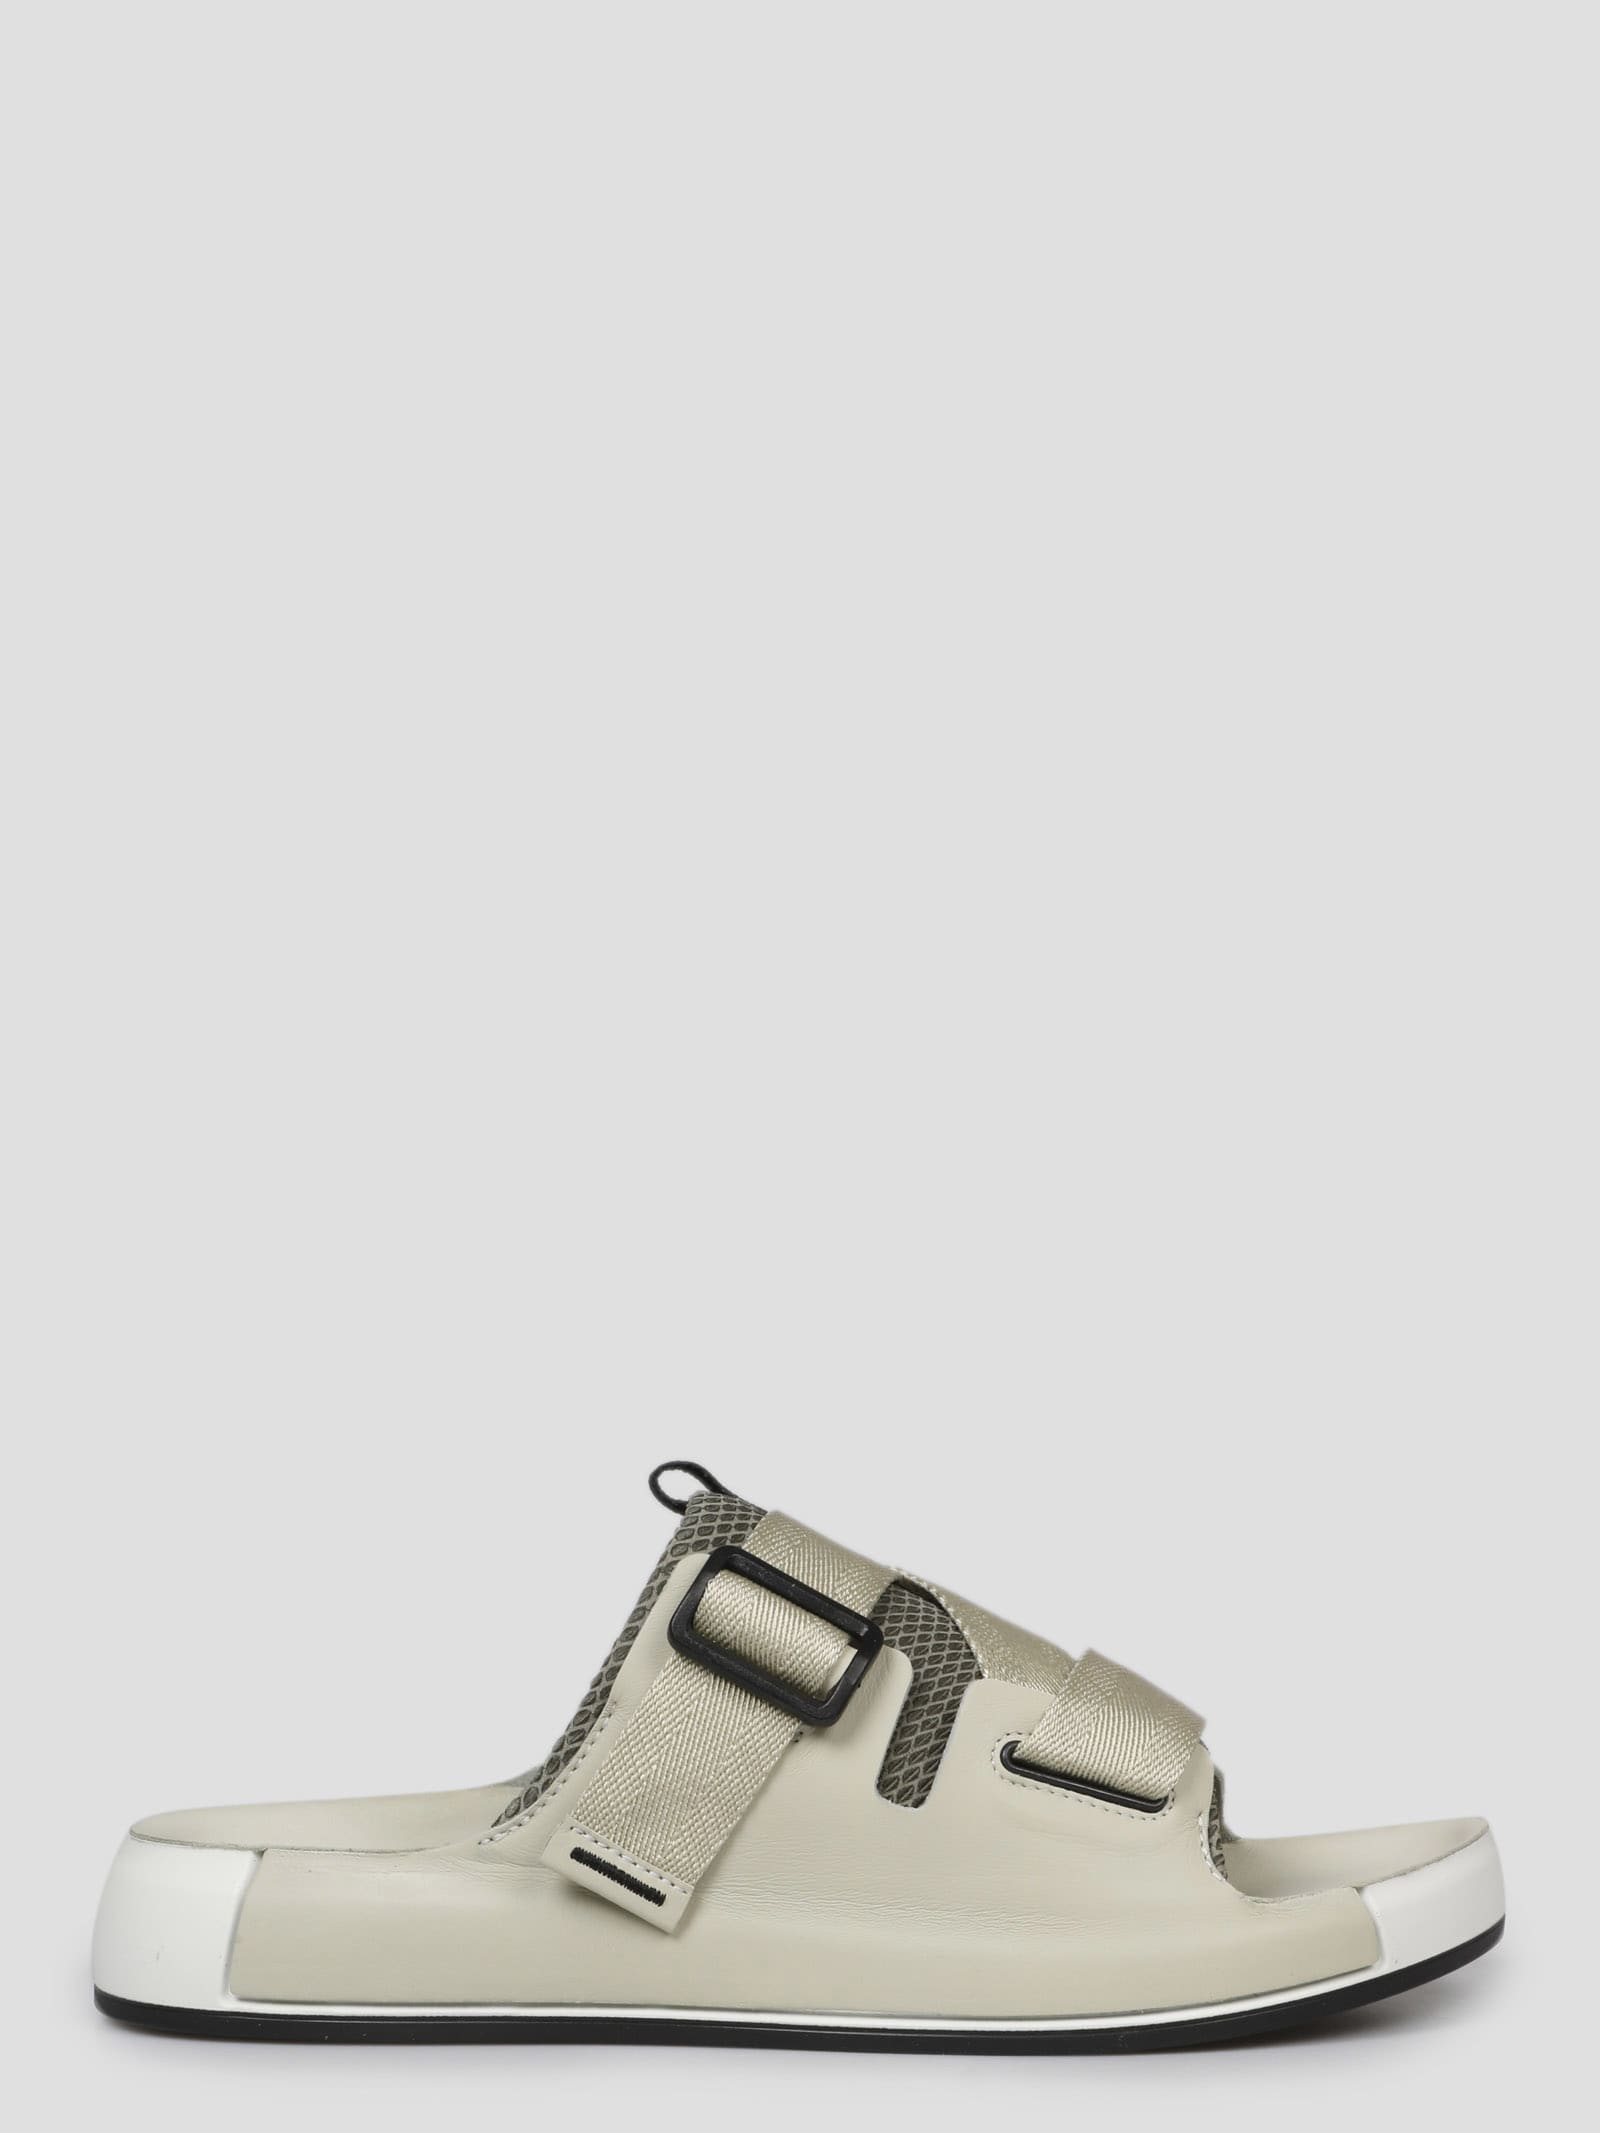 Stone Island Shadow Project Slide On Sandals